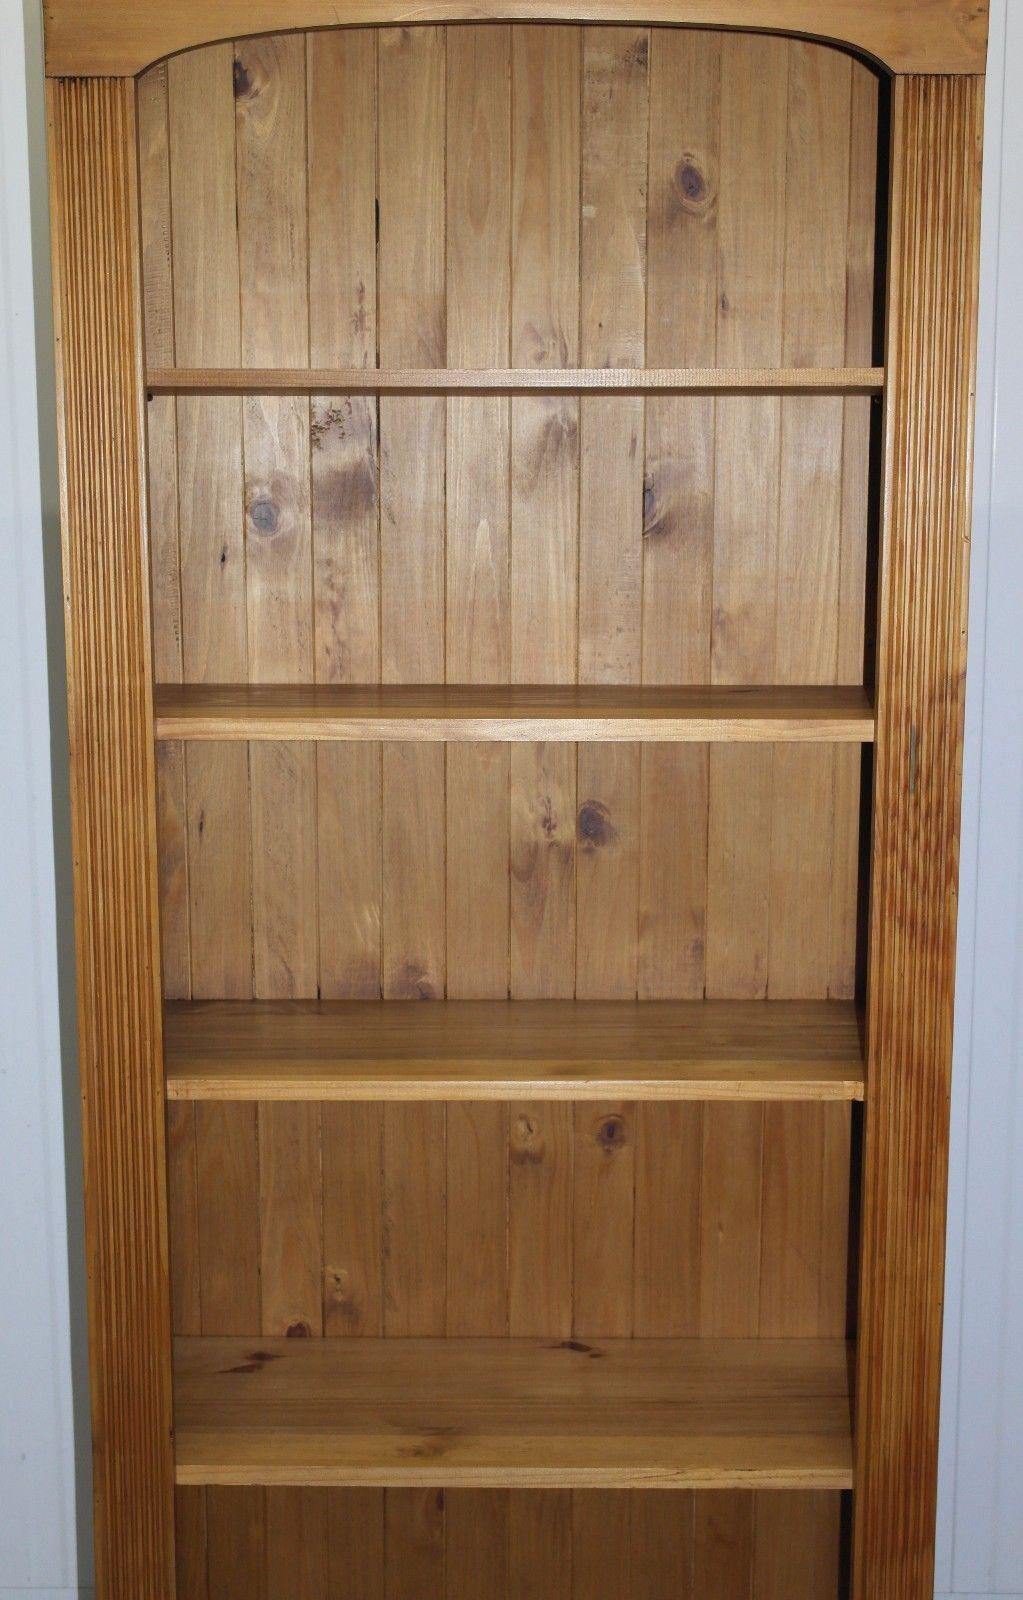 English Large Solid Pine Farmhouse Country Bookcase Lovely Natural Wood Finish and Feel